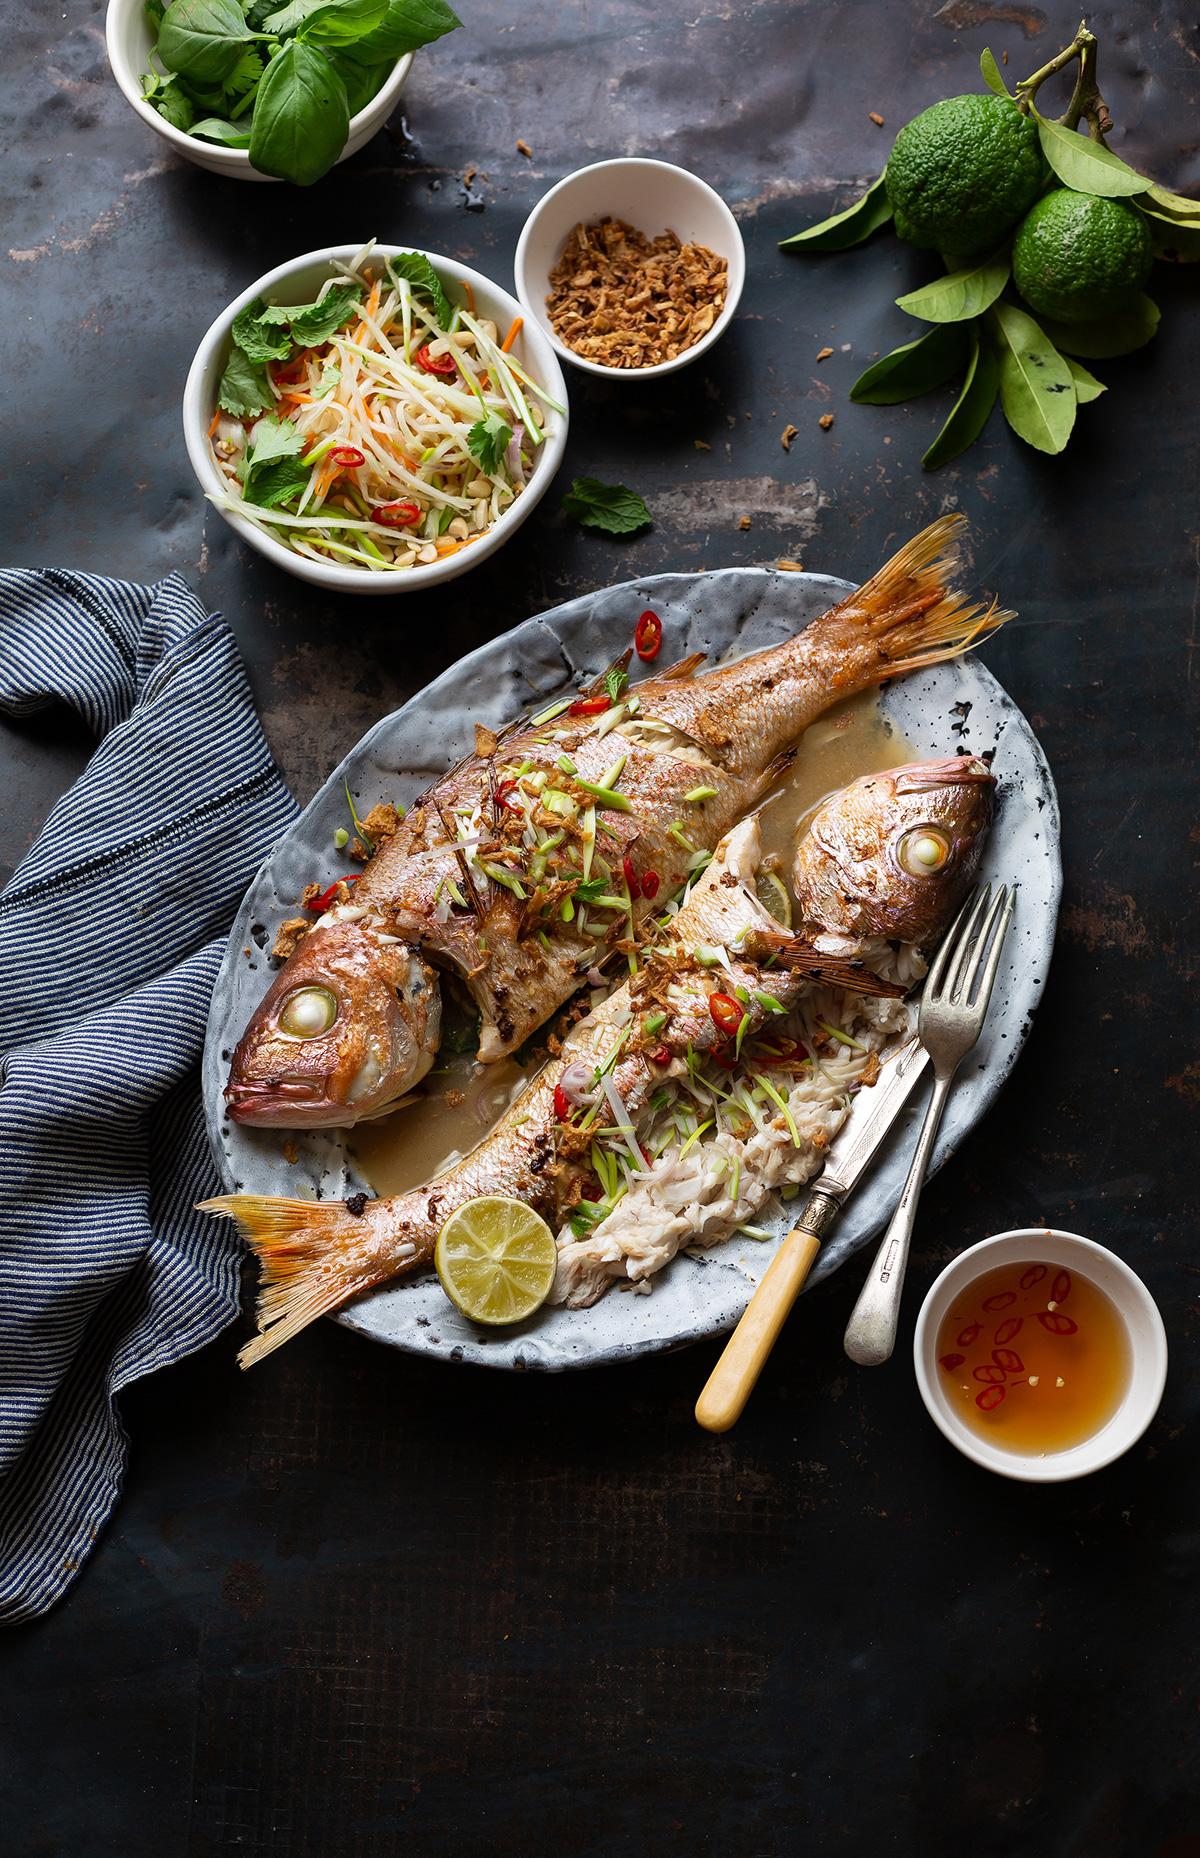 Whole roasted fish with Asian flavours & nuoc cham